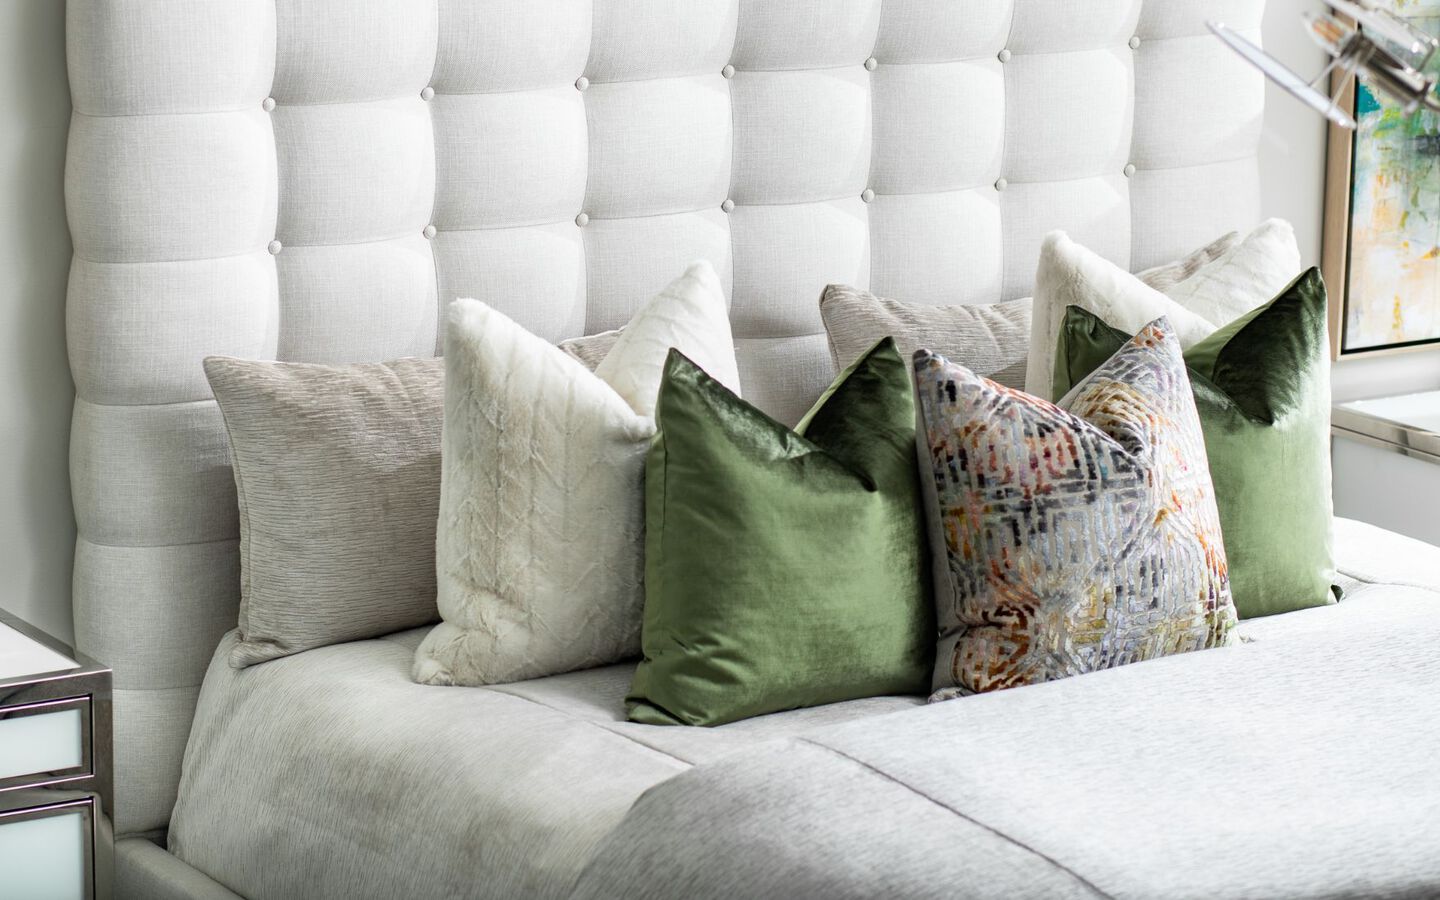 Closeup of bed with white upholstered bedframe, grey comforter, and green and grey pillows